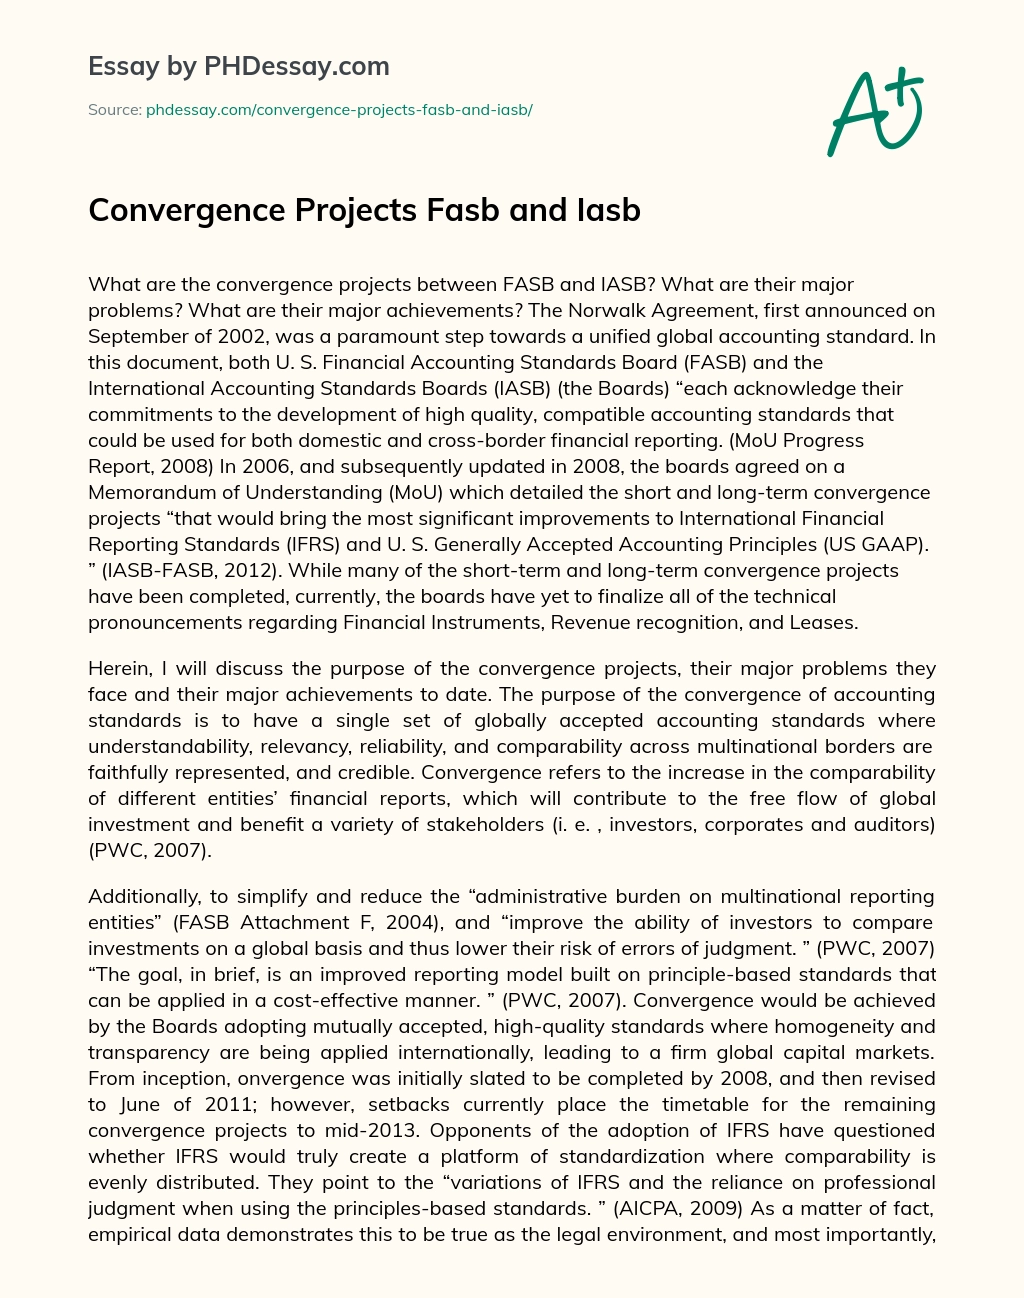 Convergence Projects Fasb and Iasb essay